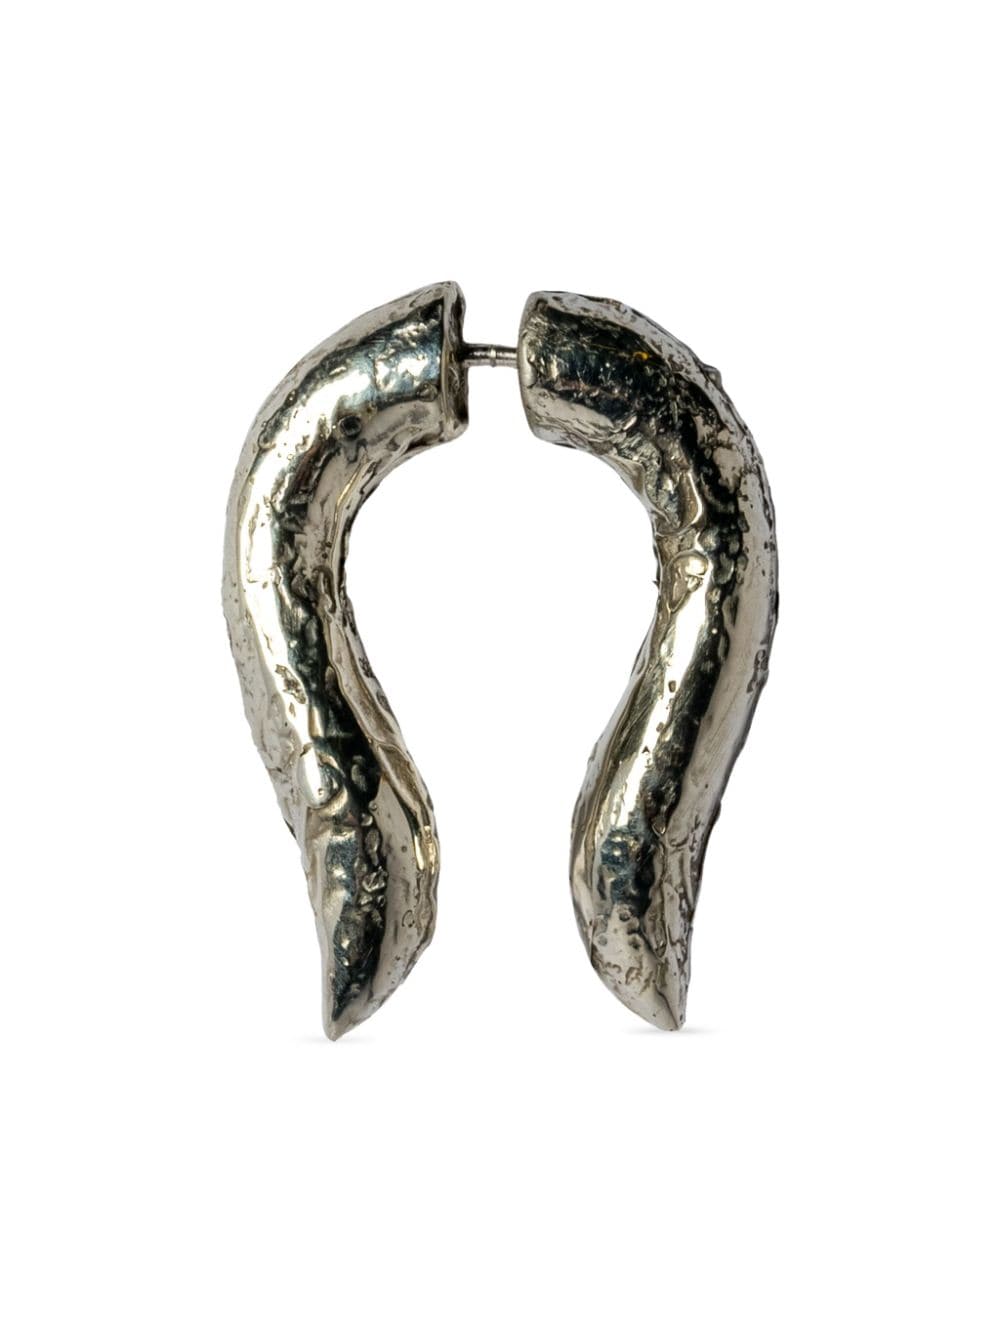 Parts Of Four Hathor Earrings In Silver